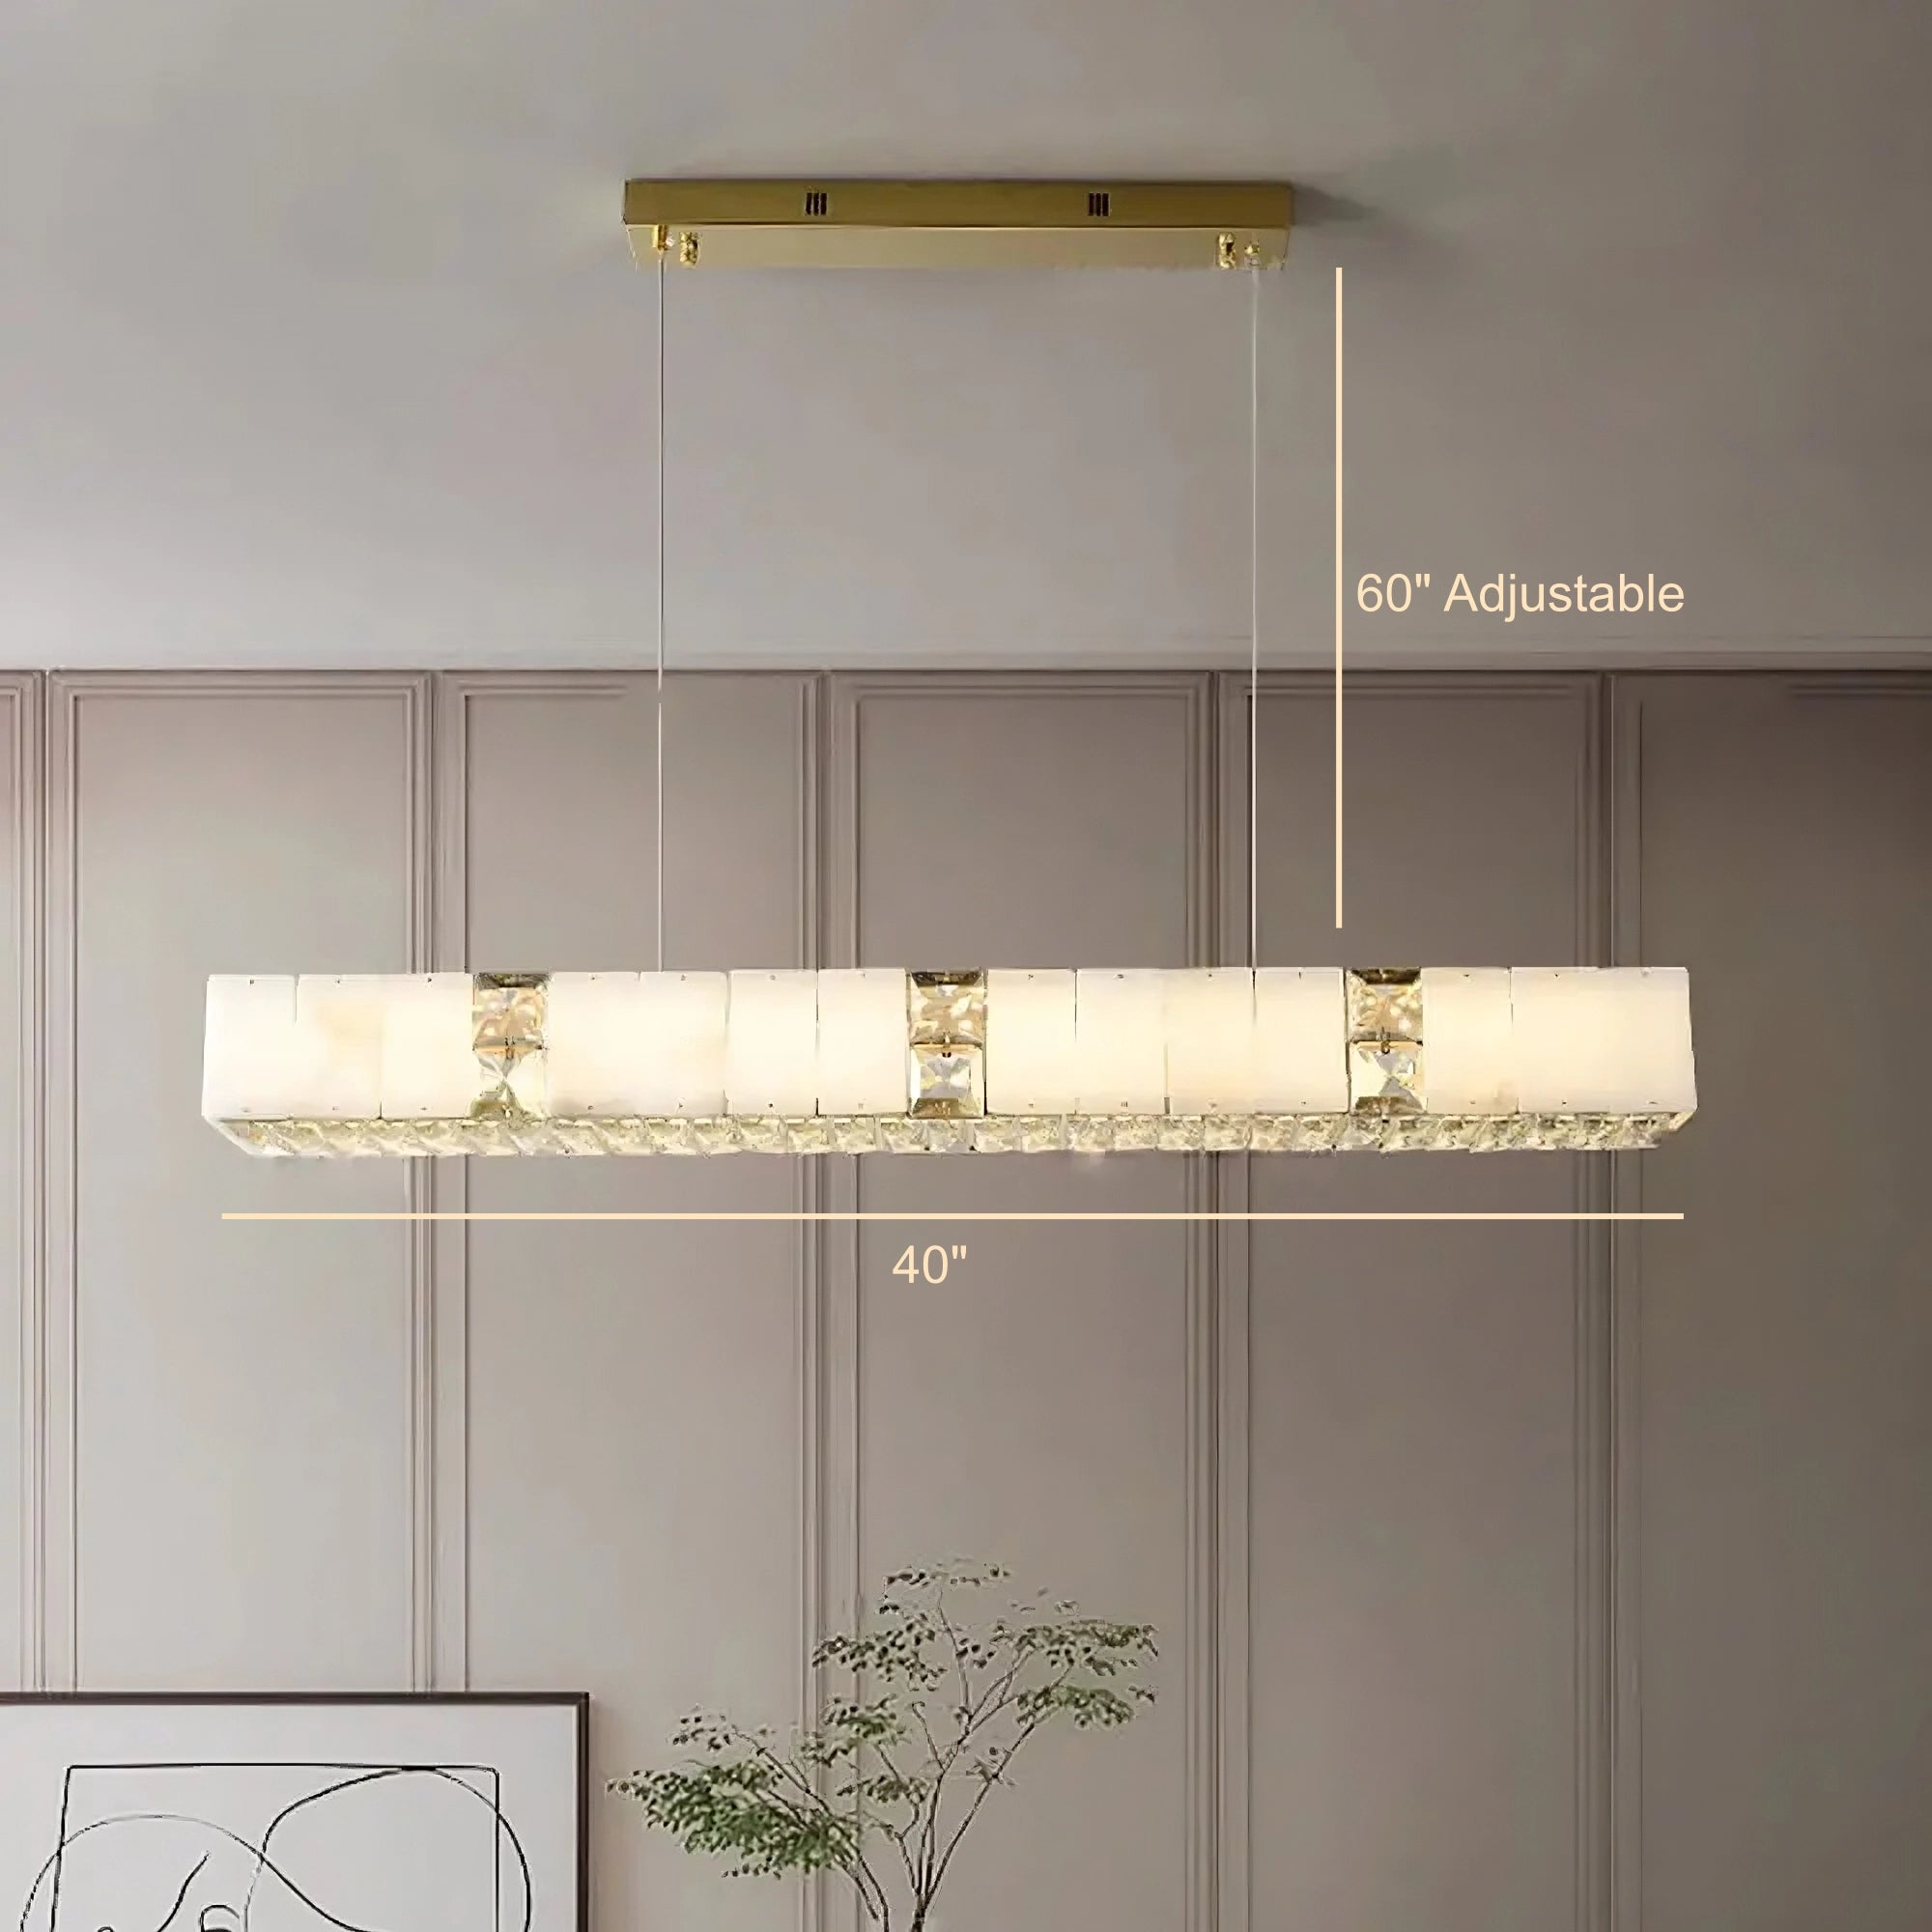 Natural Marble & Crystal Modern Ceiling Light